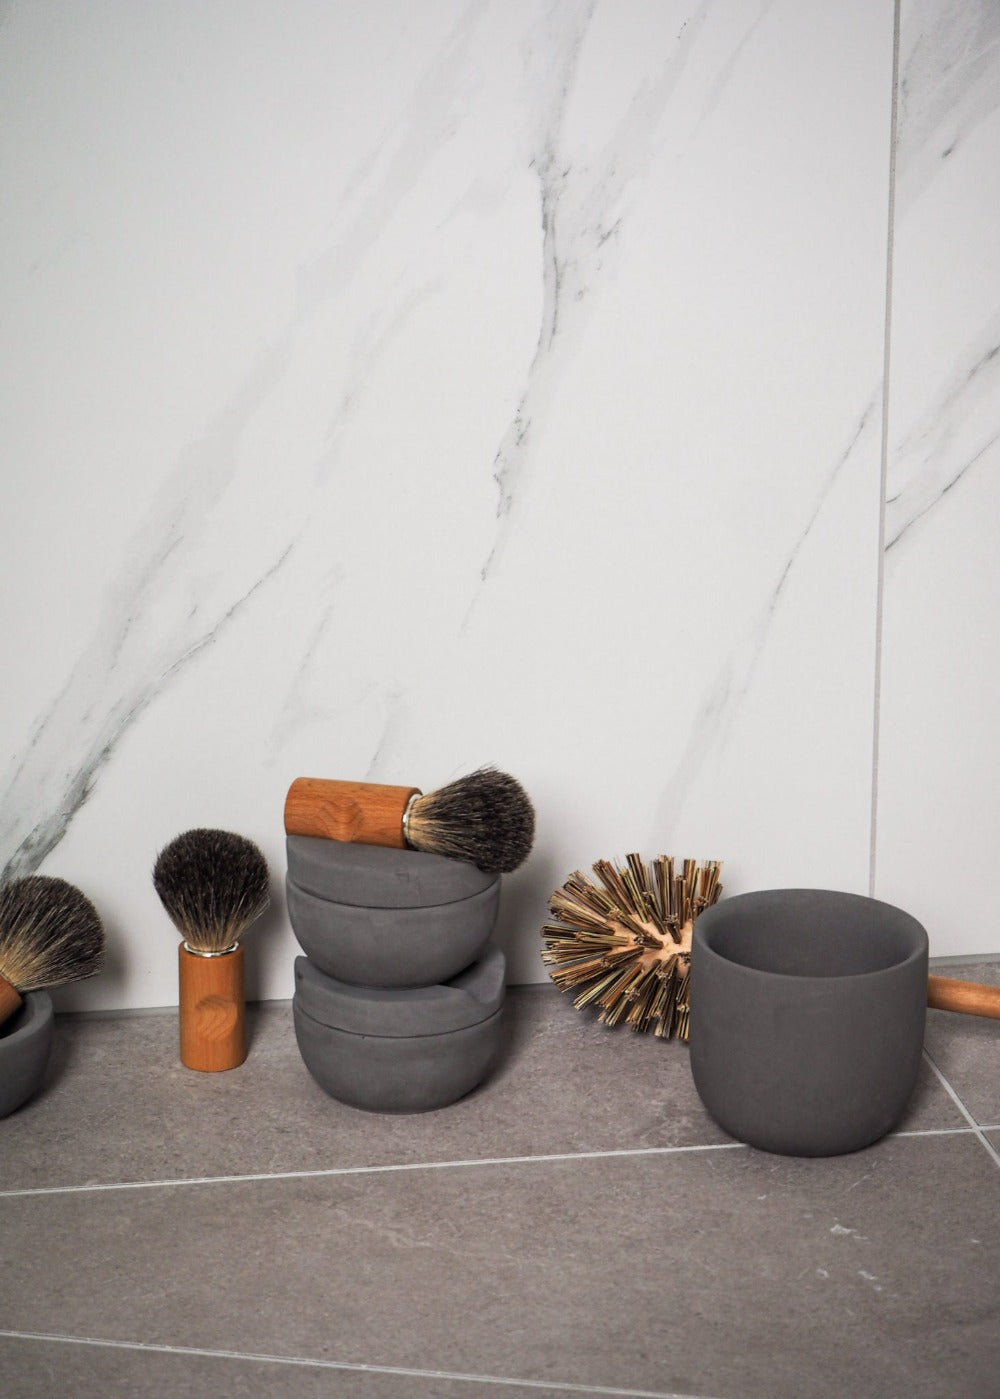 Wooden Toilet Brush with Concrete Holder Grey